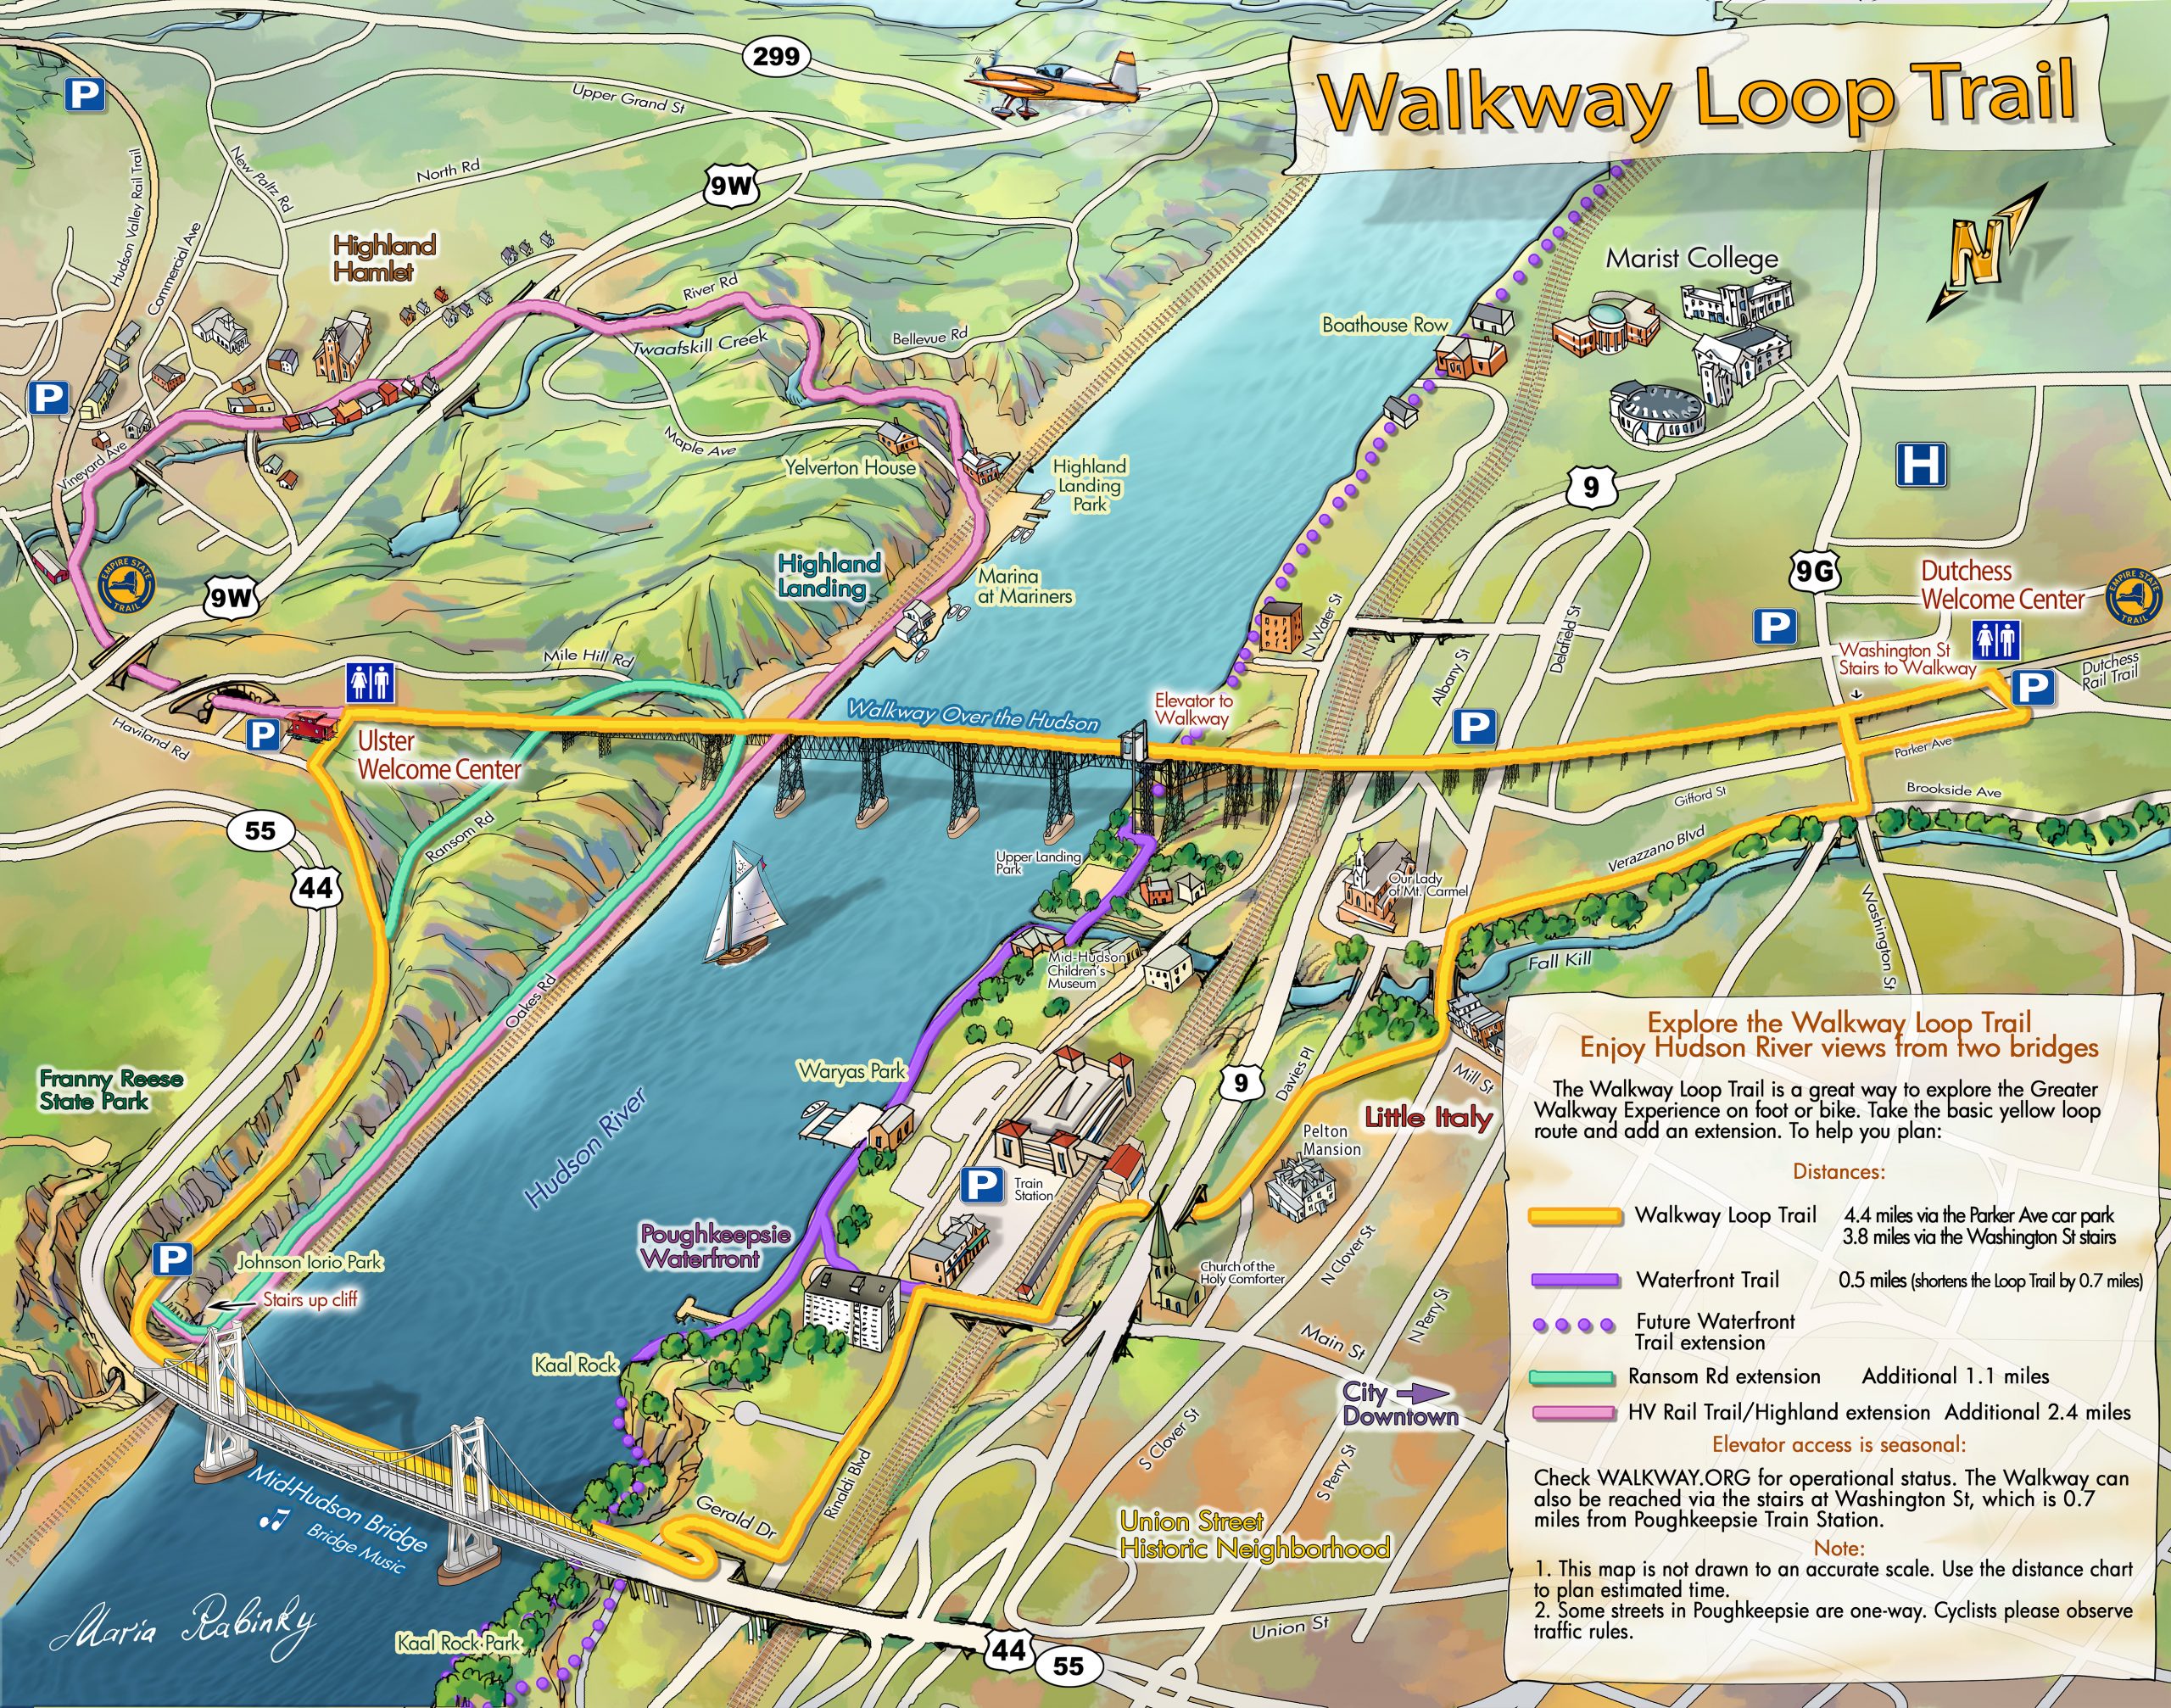 https://walkway.org/wp-content/uploads/2020/06/Loop-Trail-Insert_Poughkeepsie_Illustrated-map-FINAL-FOR-SPRING-2019-scaled.jpg